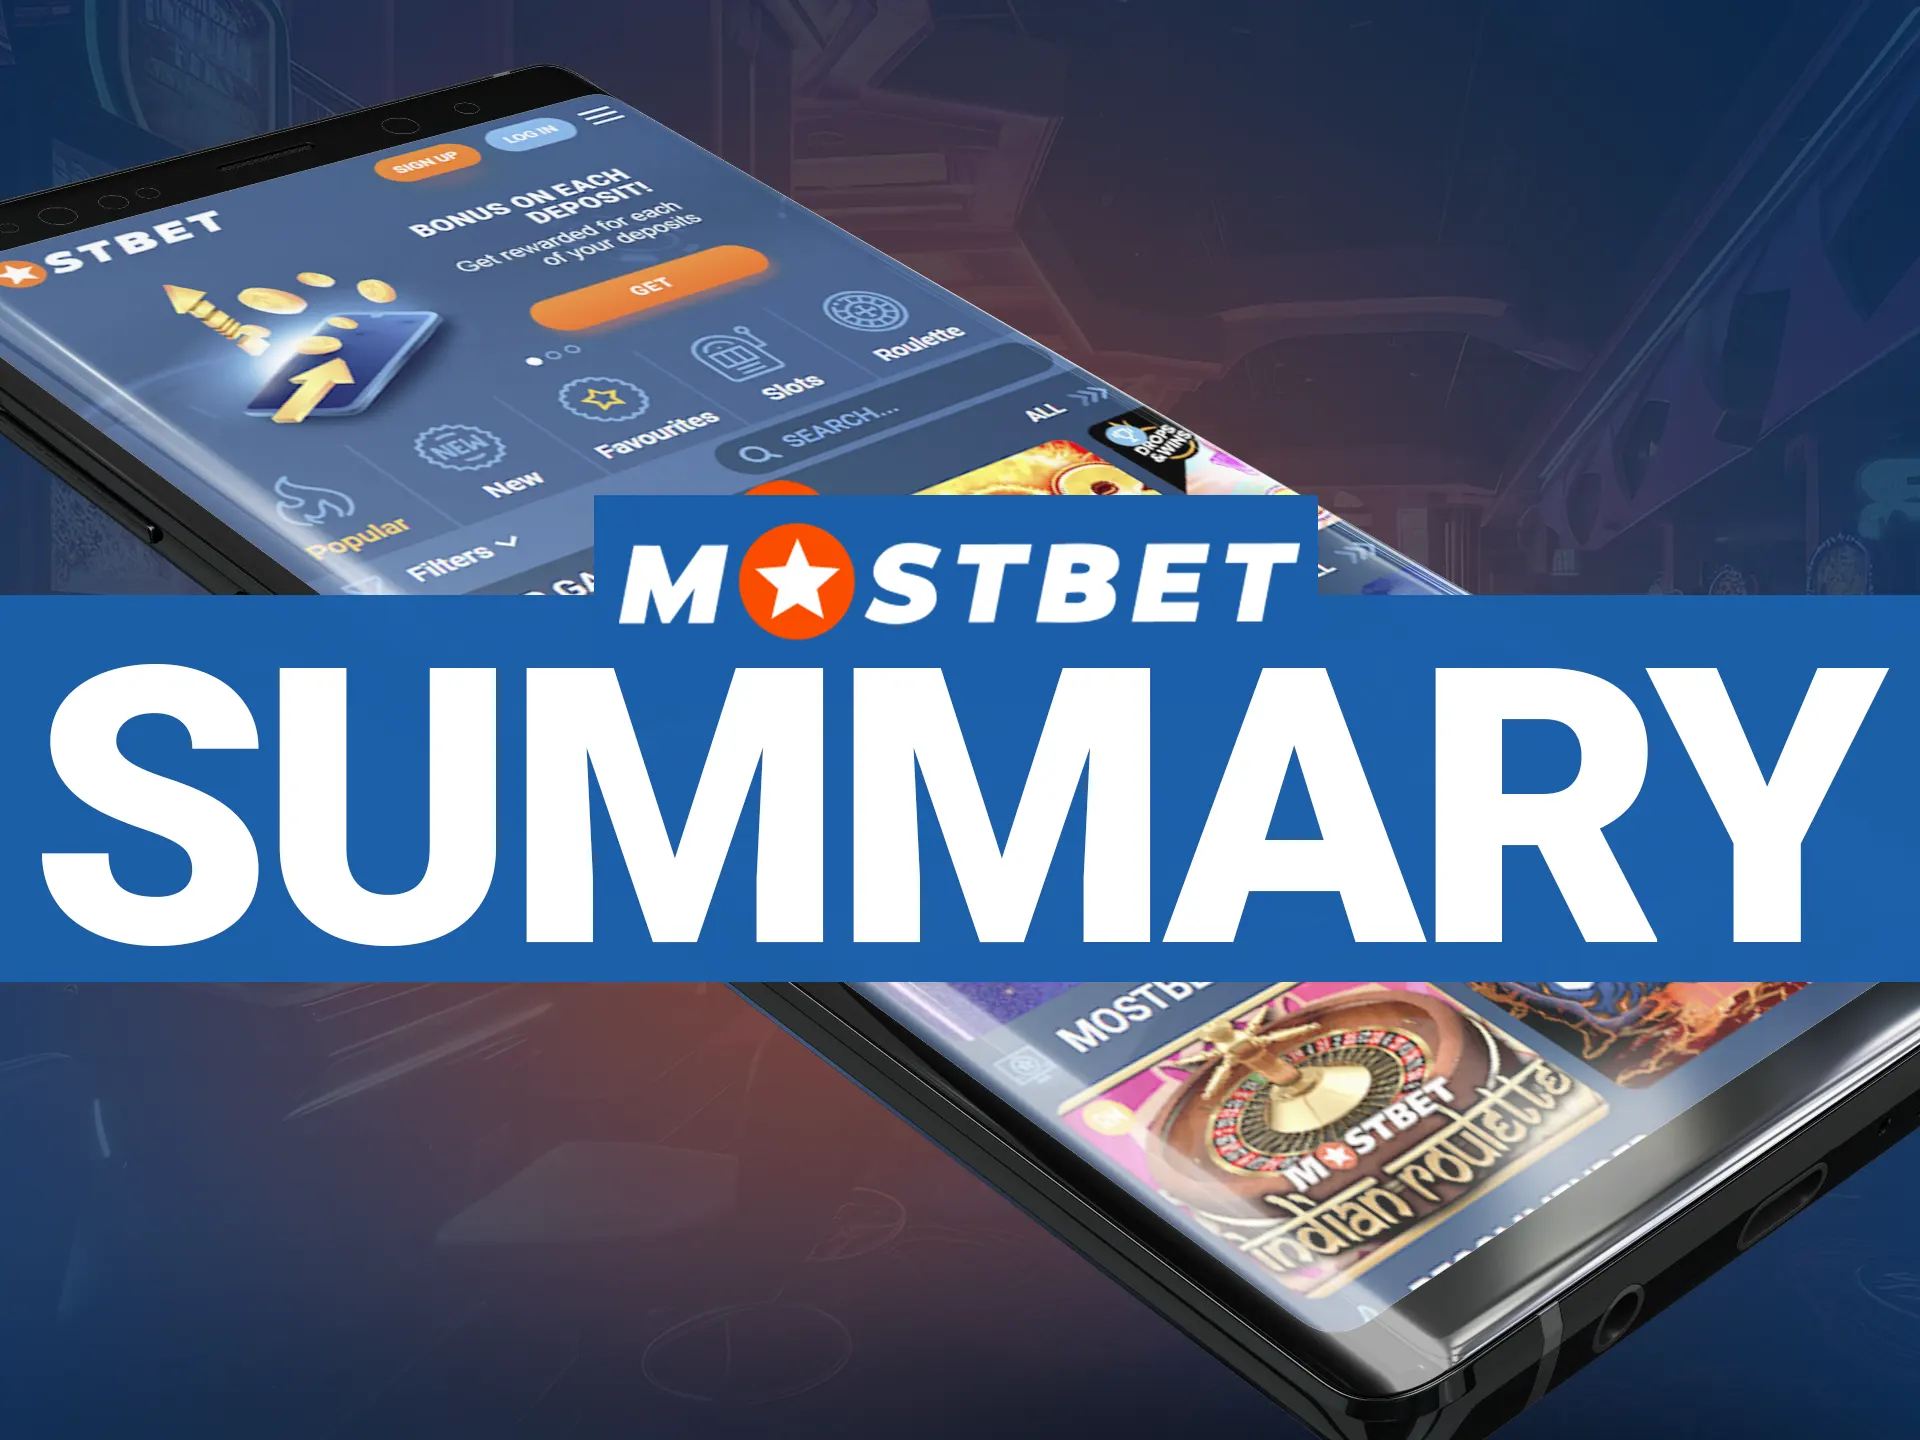 The Mostbet casino app gives its users an exciting gaming experience.